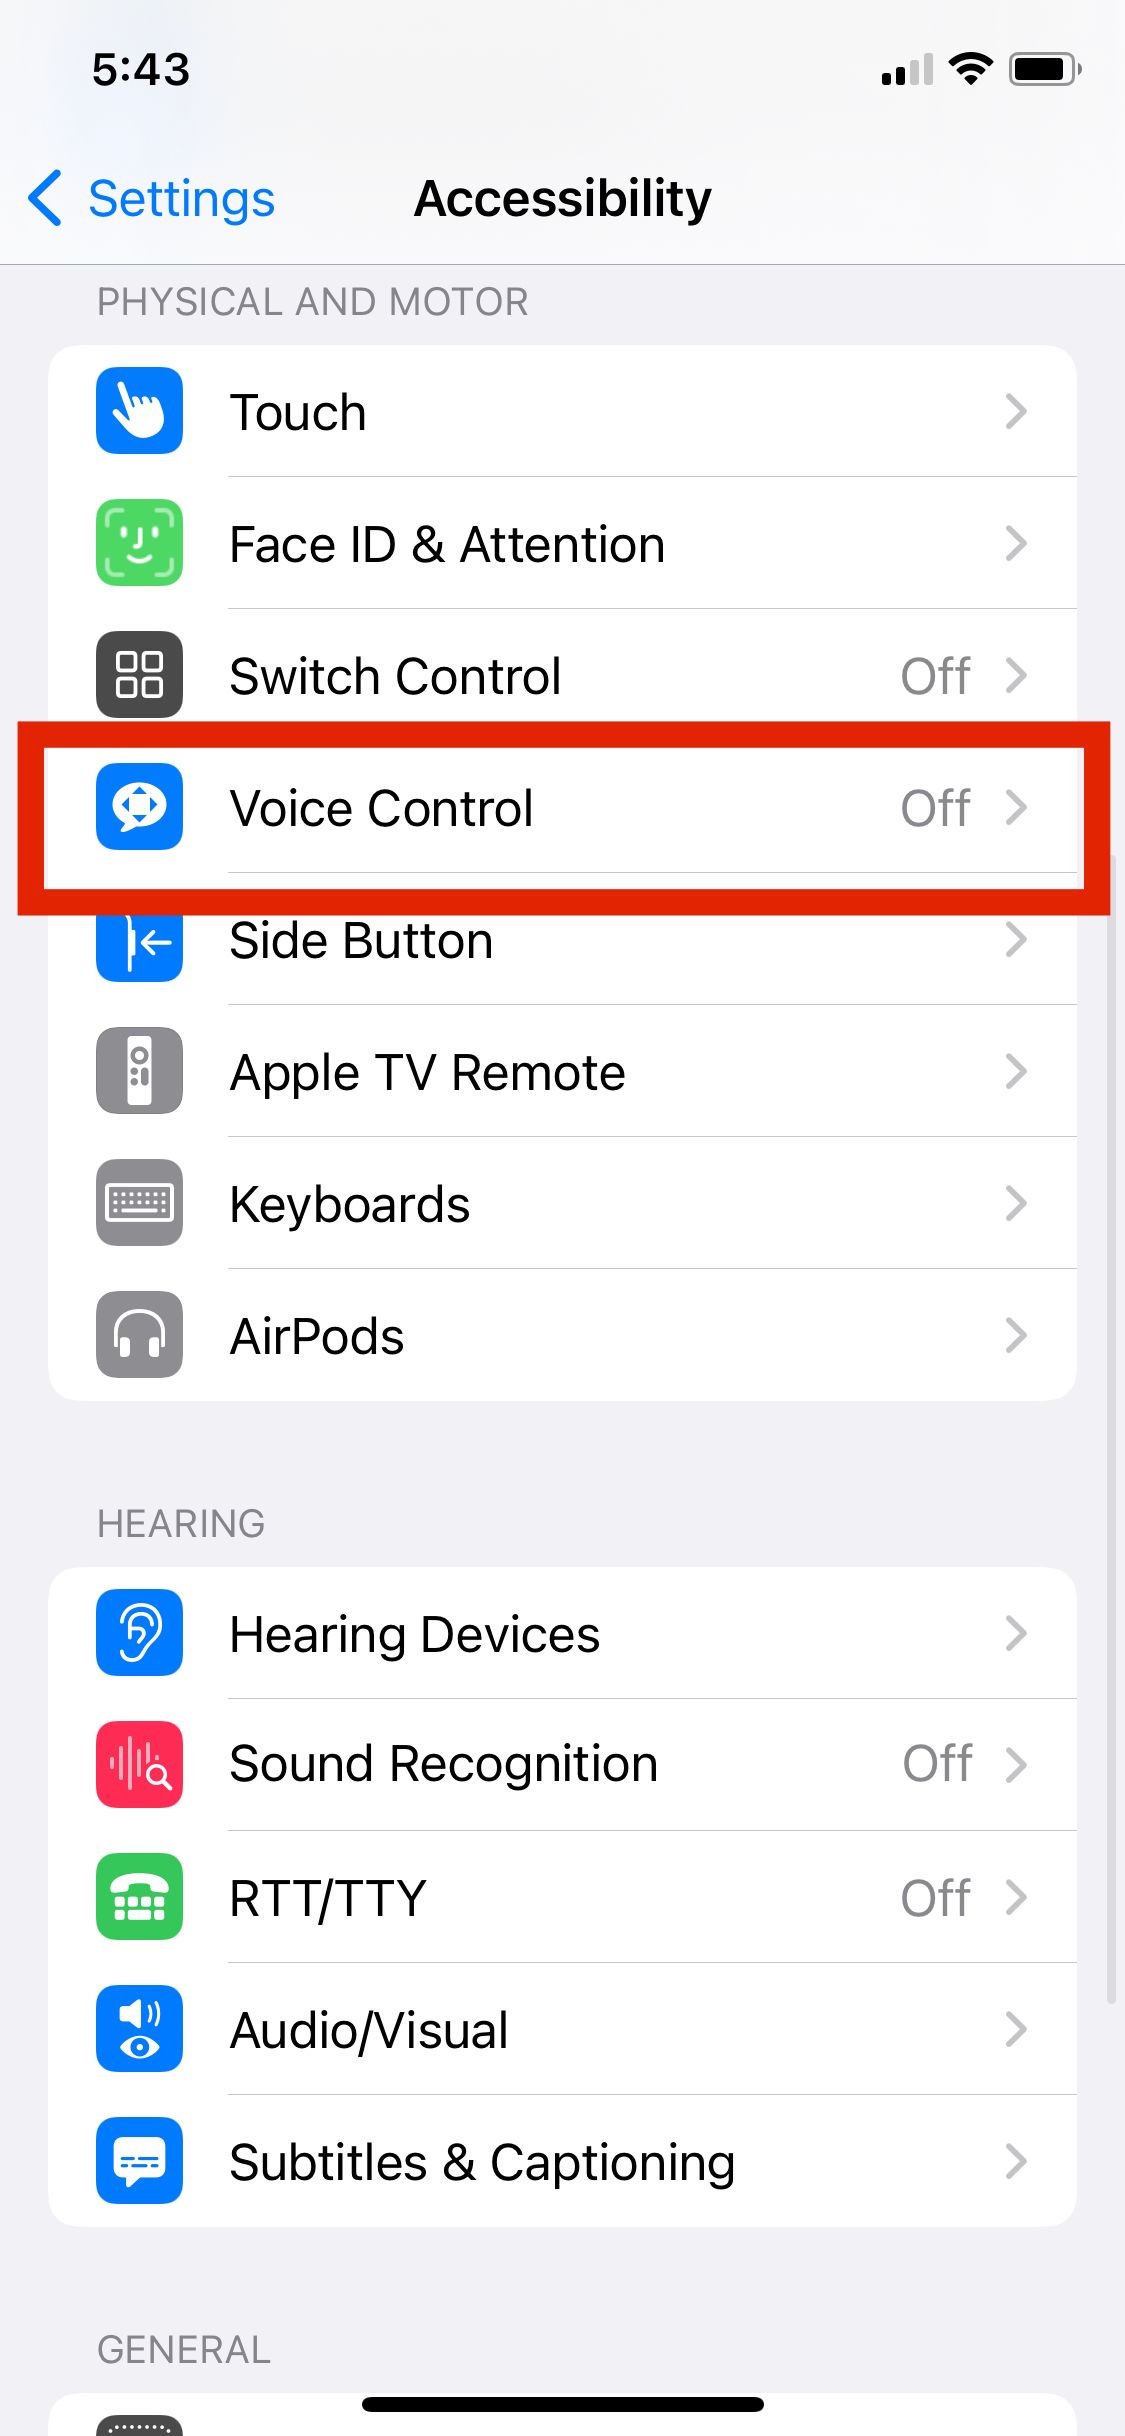 Voice control setting